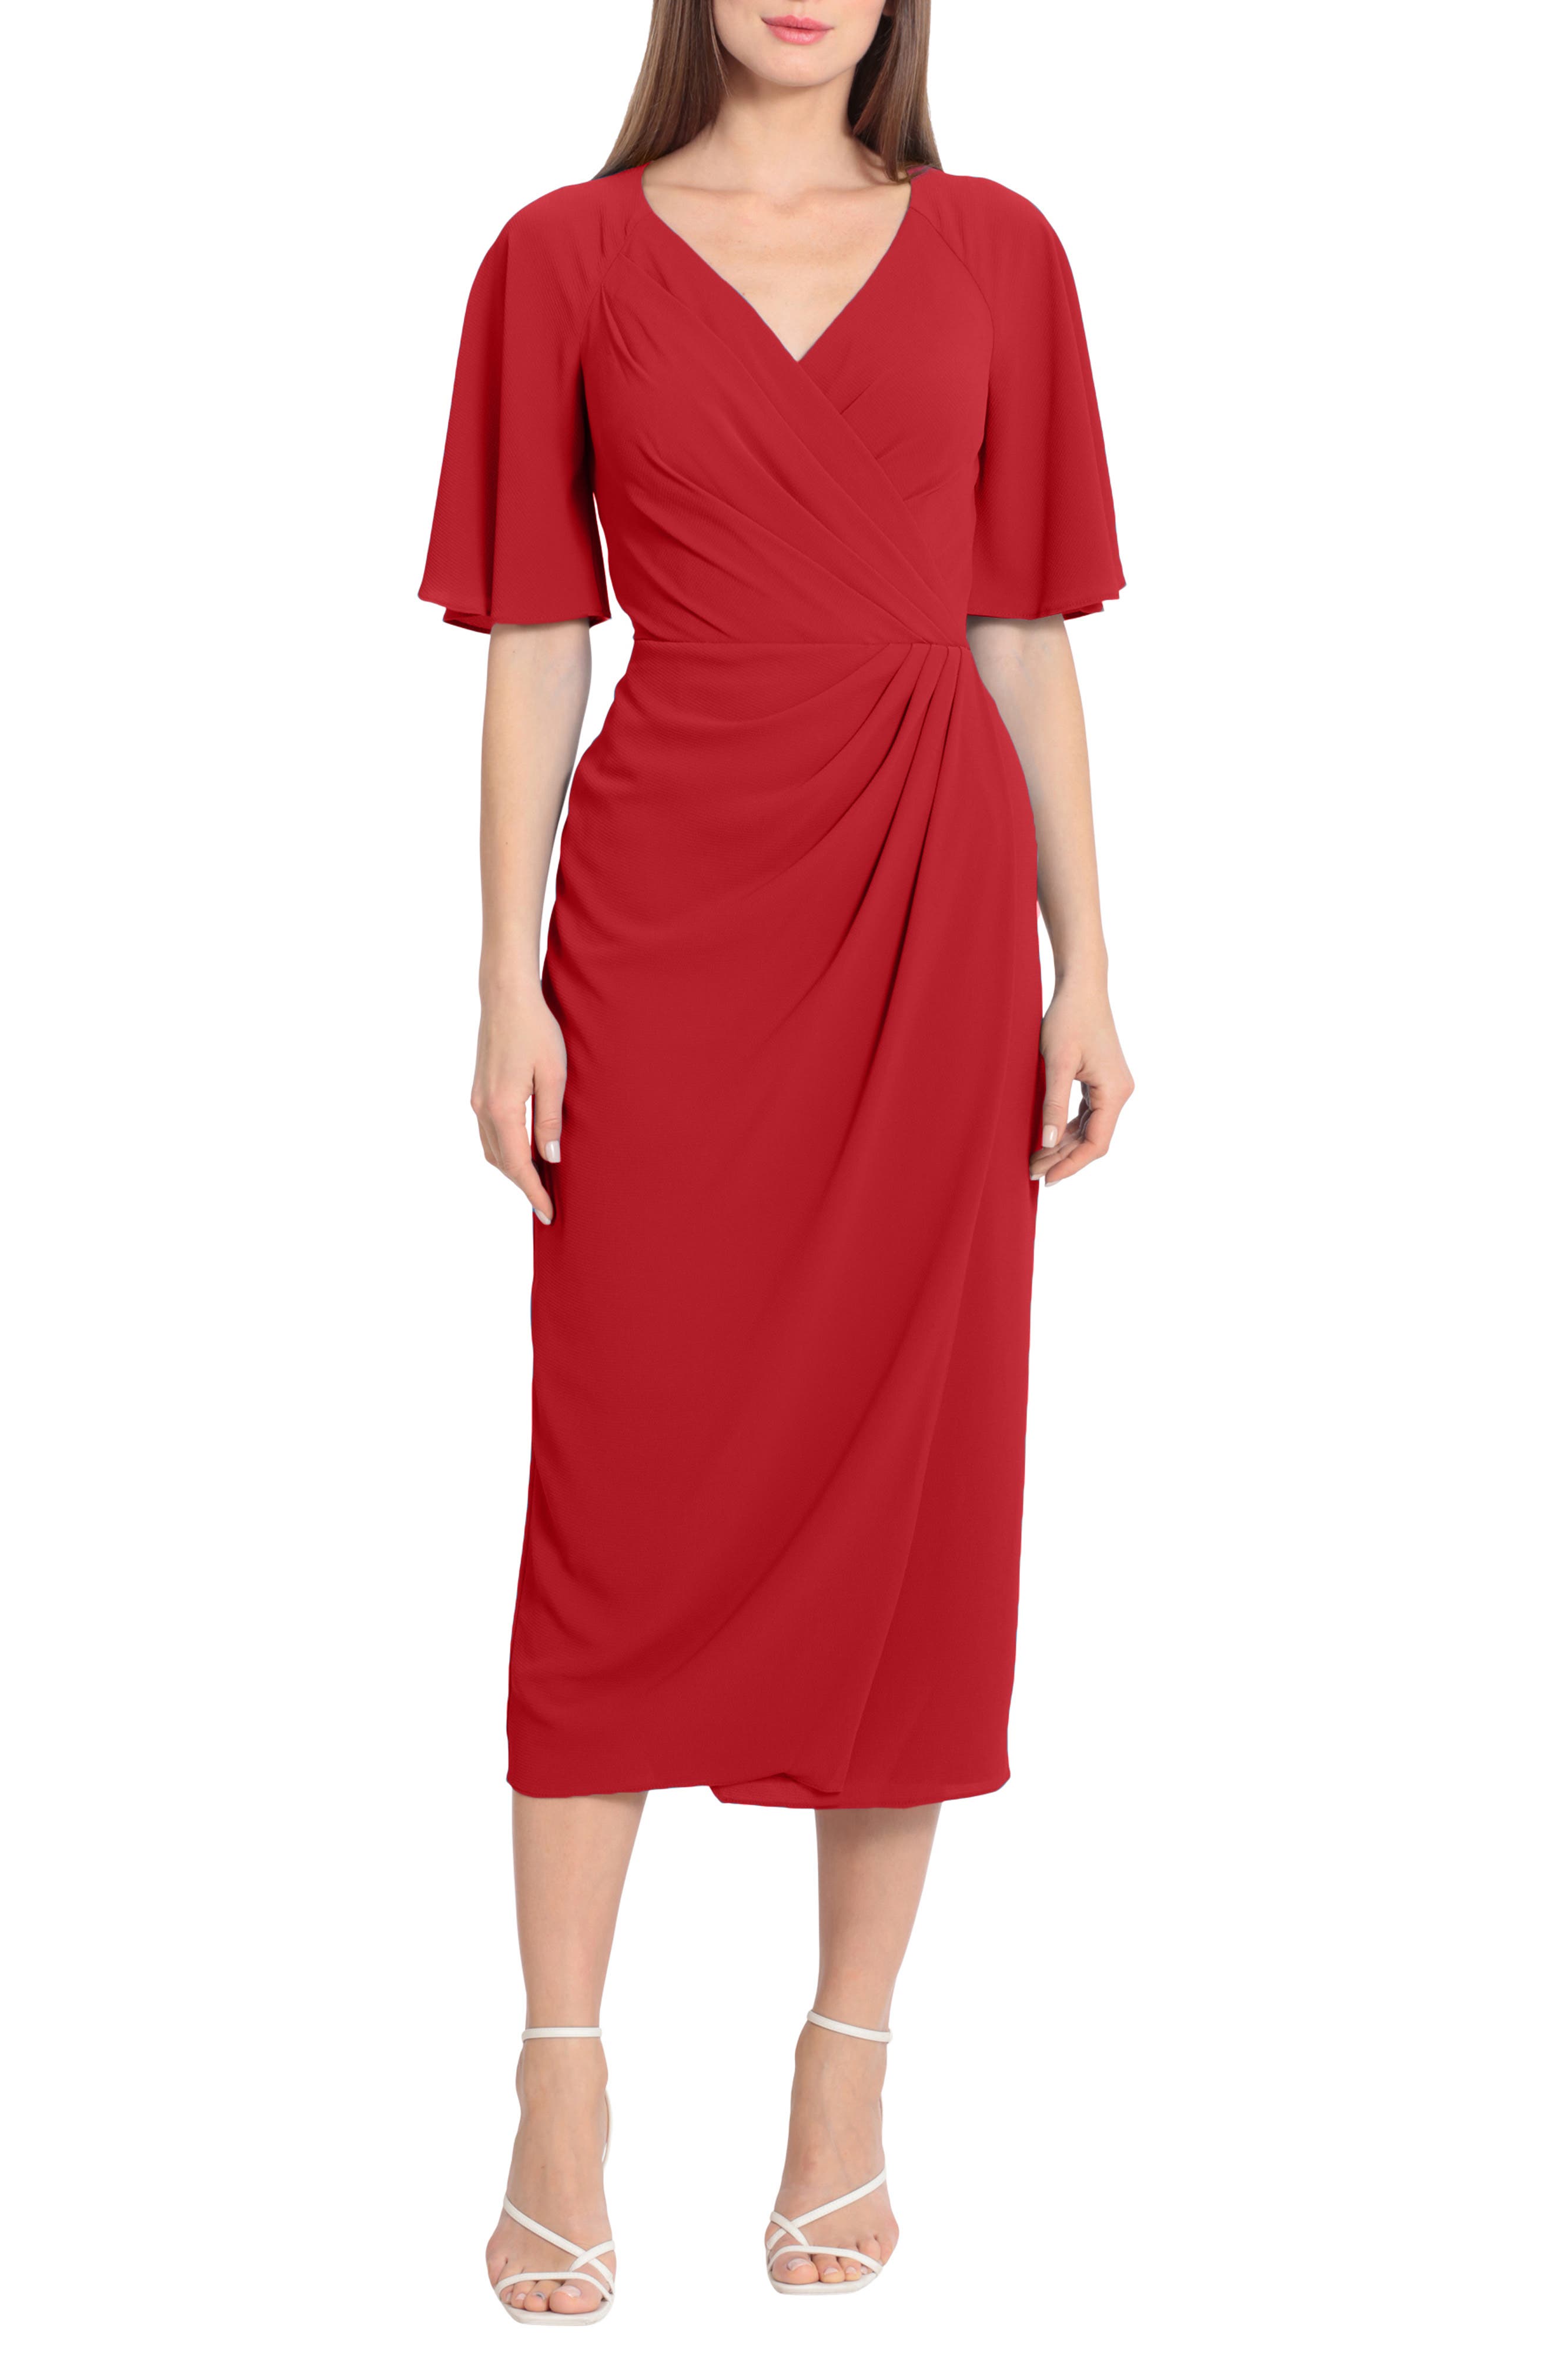 red dress women’s clothing